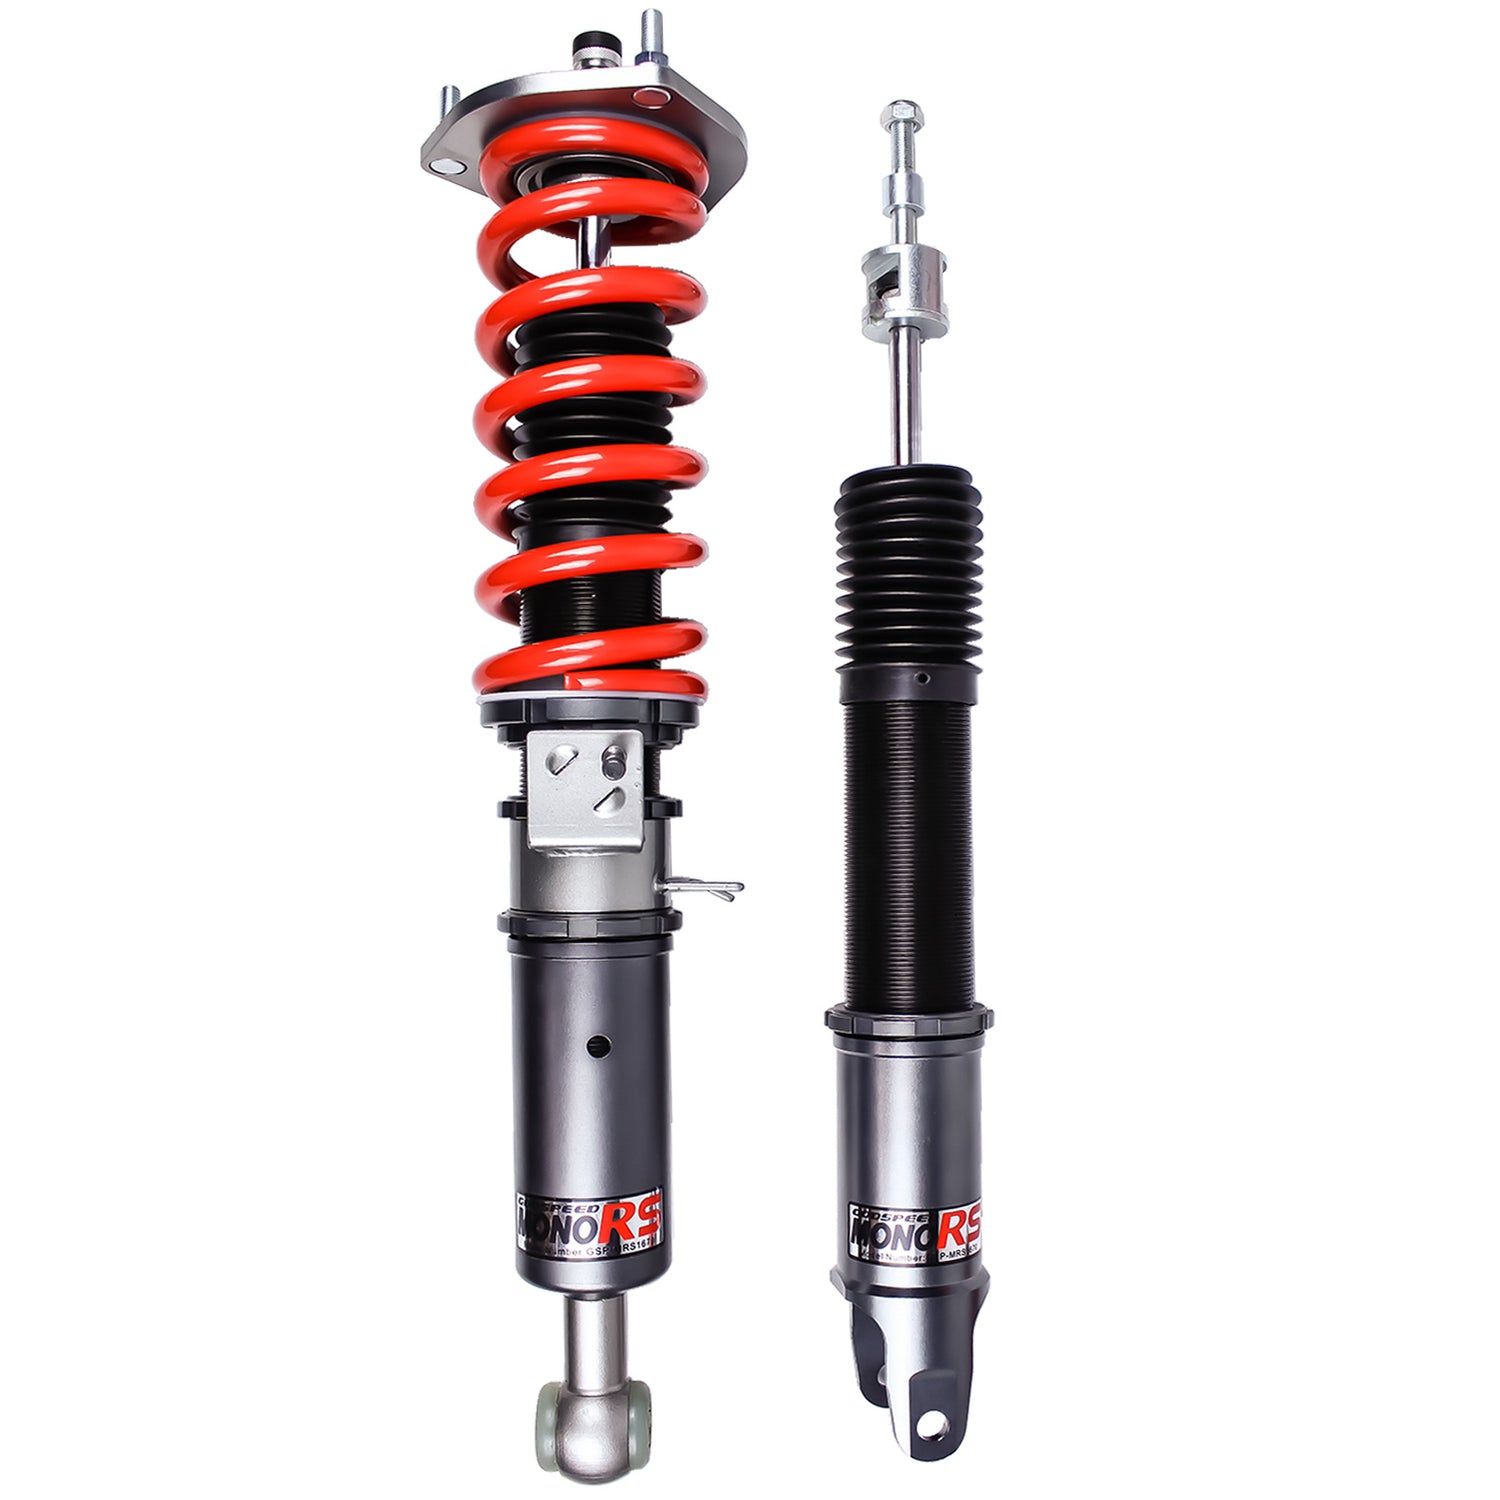 Godspeed MRS1670-B MonoRS Coilover Lowering Kit, 32 Damping Adjustment, Ride Height Adjustable